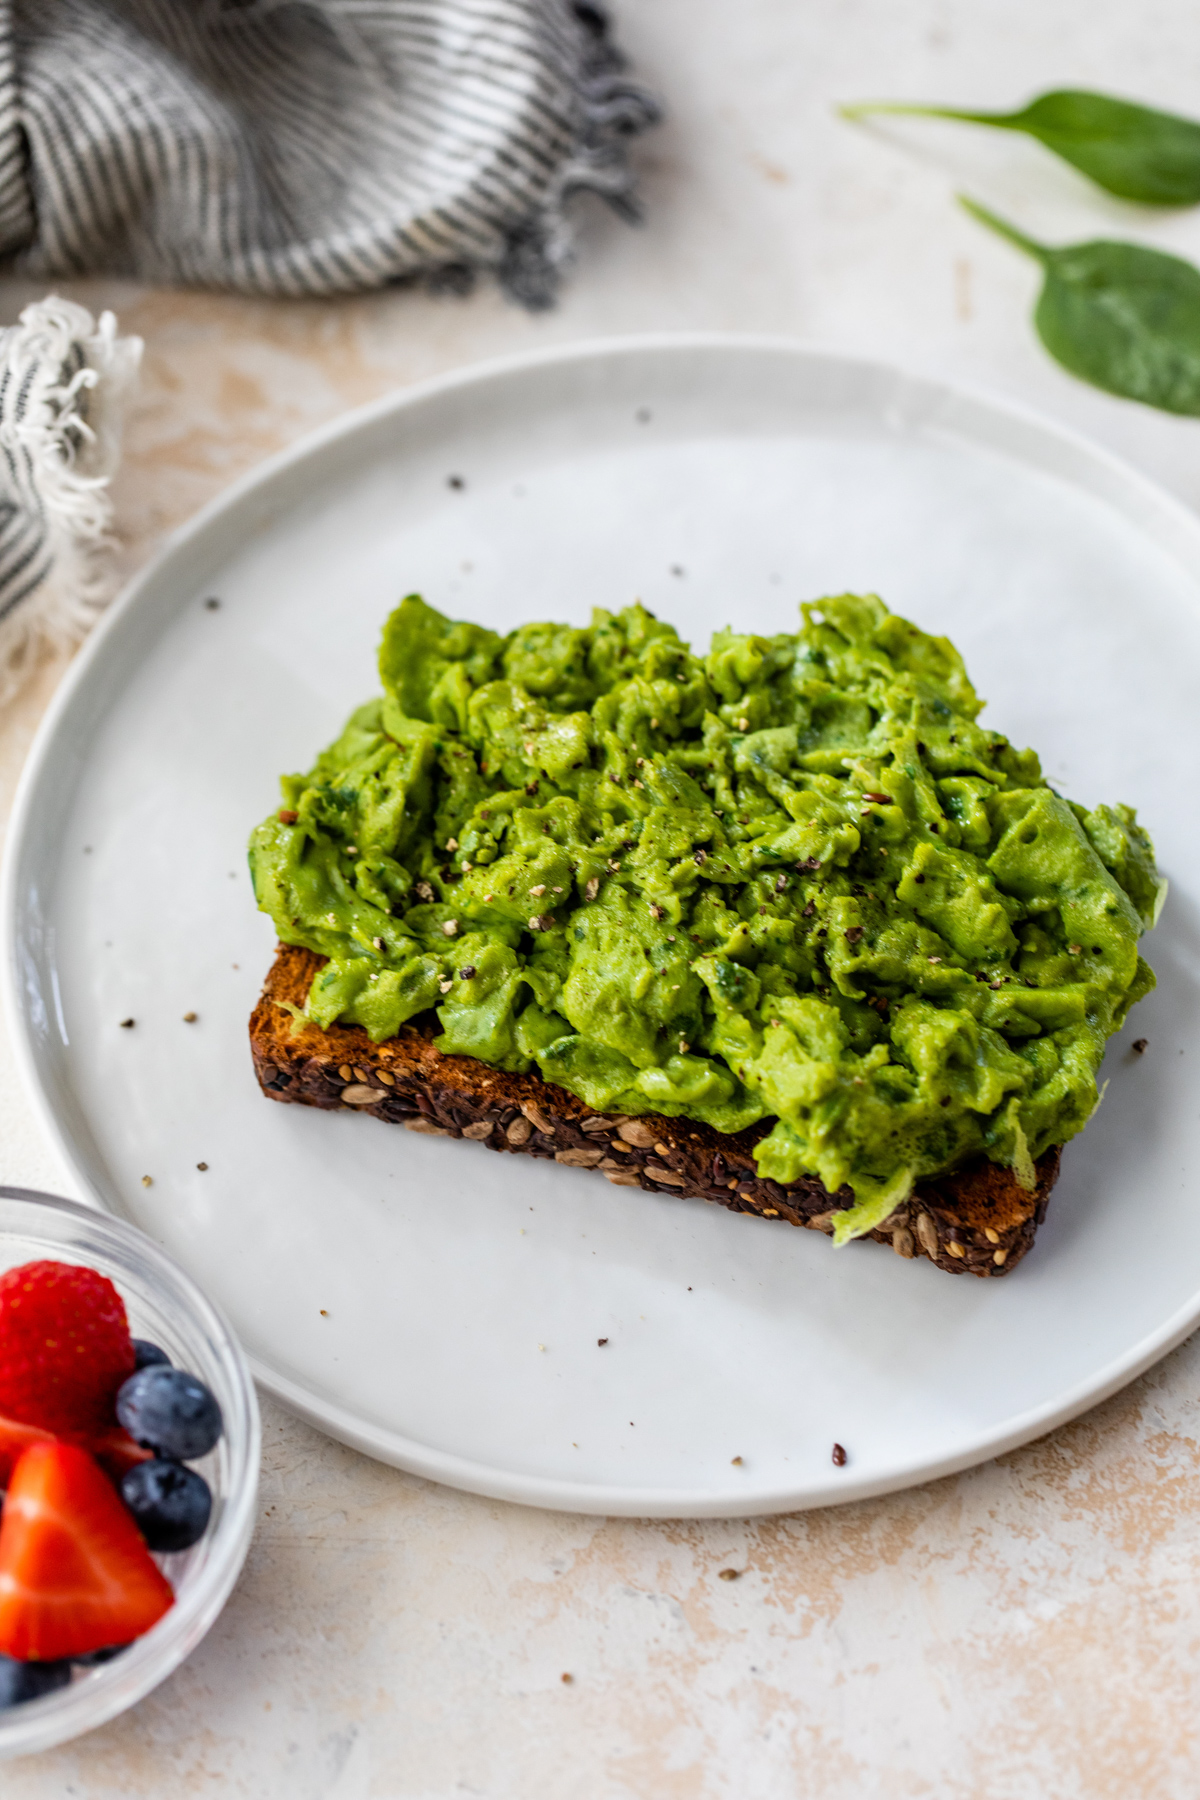 green scrambled eggs made with spinach on top of whole grain toast